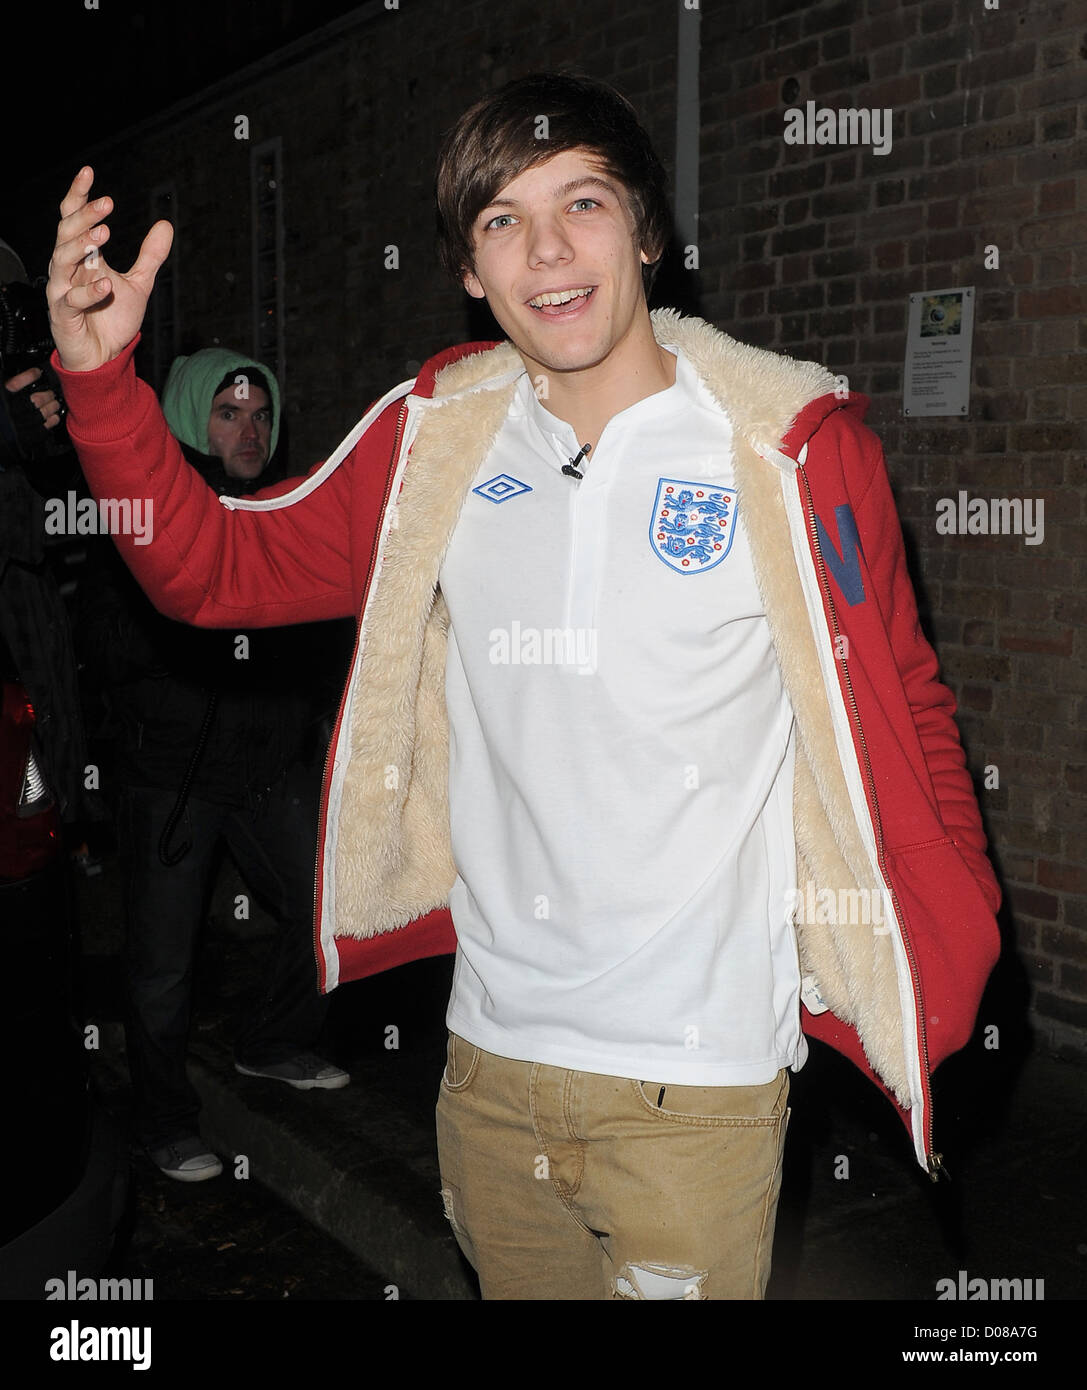 X Factor finalist Louis Tomlinson from boy band One Direction leaving a  studio wearing an England football shirt, in Stock Photo - Alamy